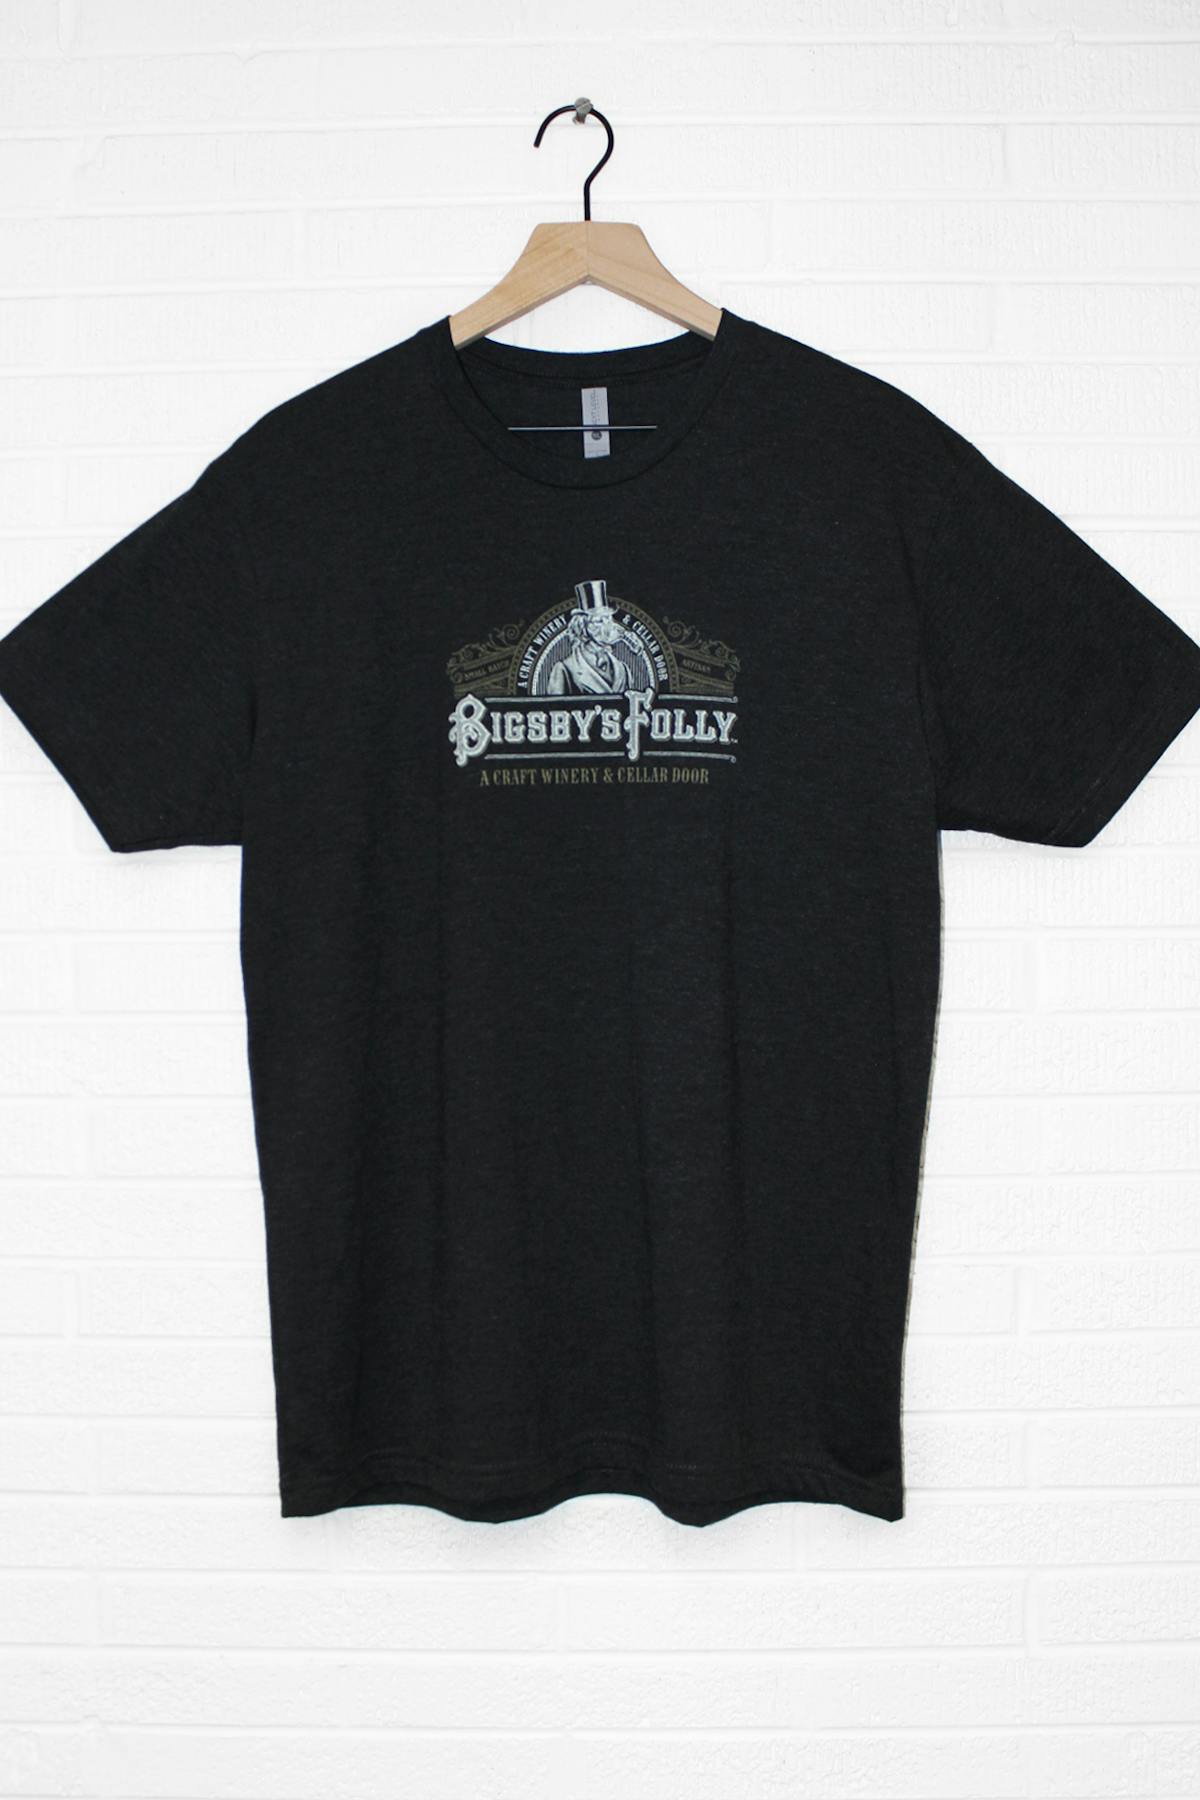 Primary image of our Tasteful. Elegant. Legit. Custom T-shirts That Define Quality project